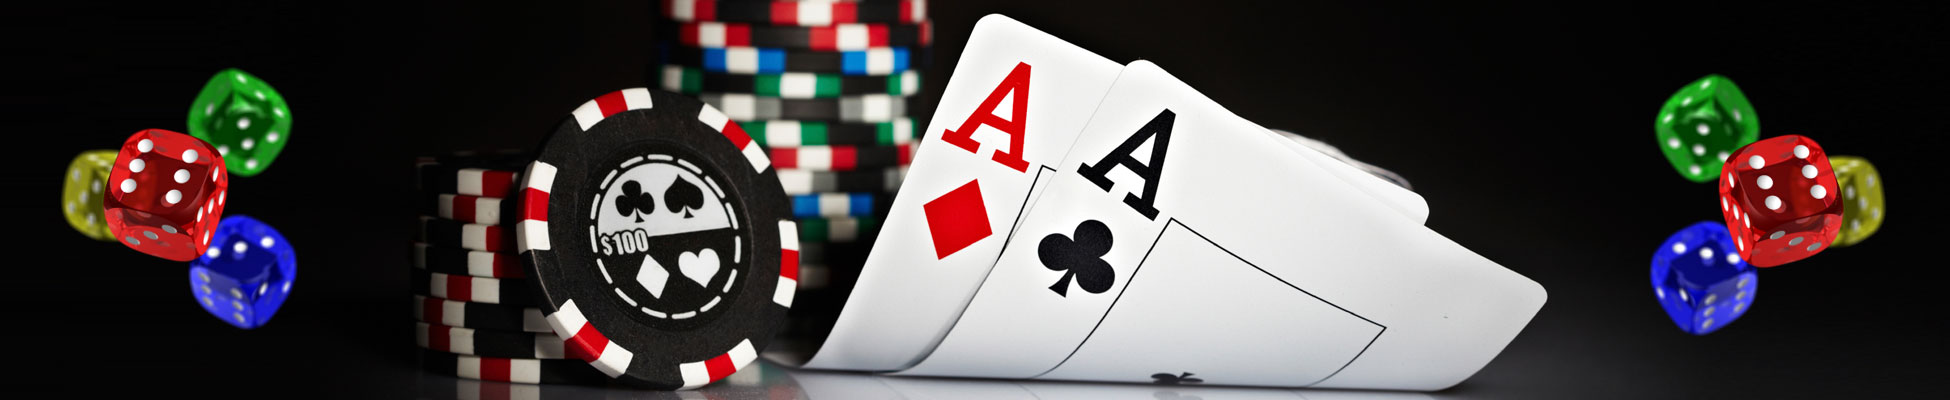 casino games, dice cards and casino chips